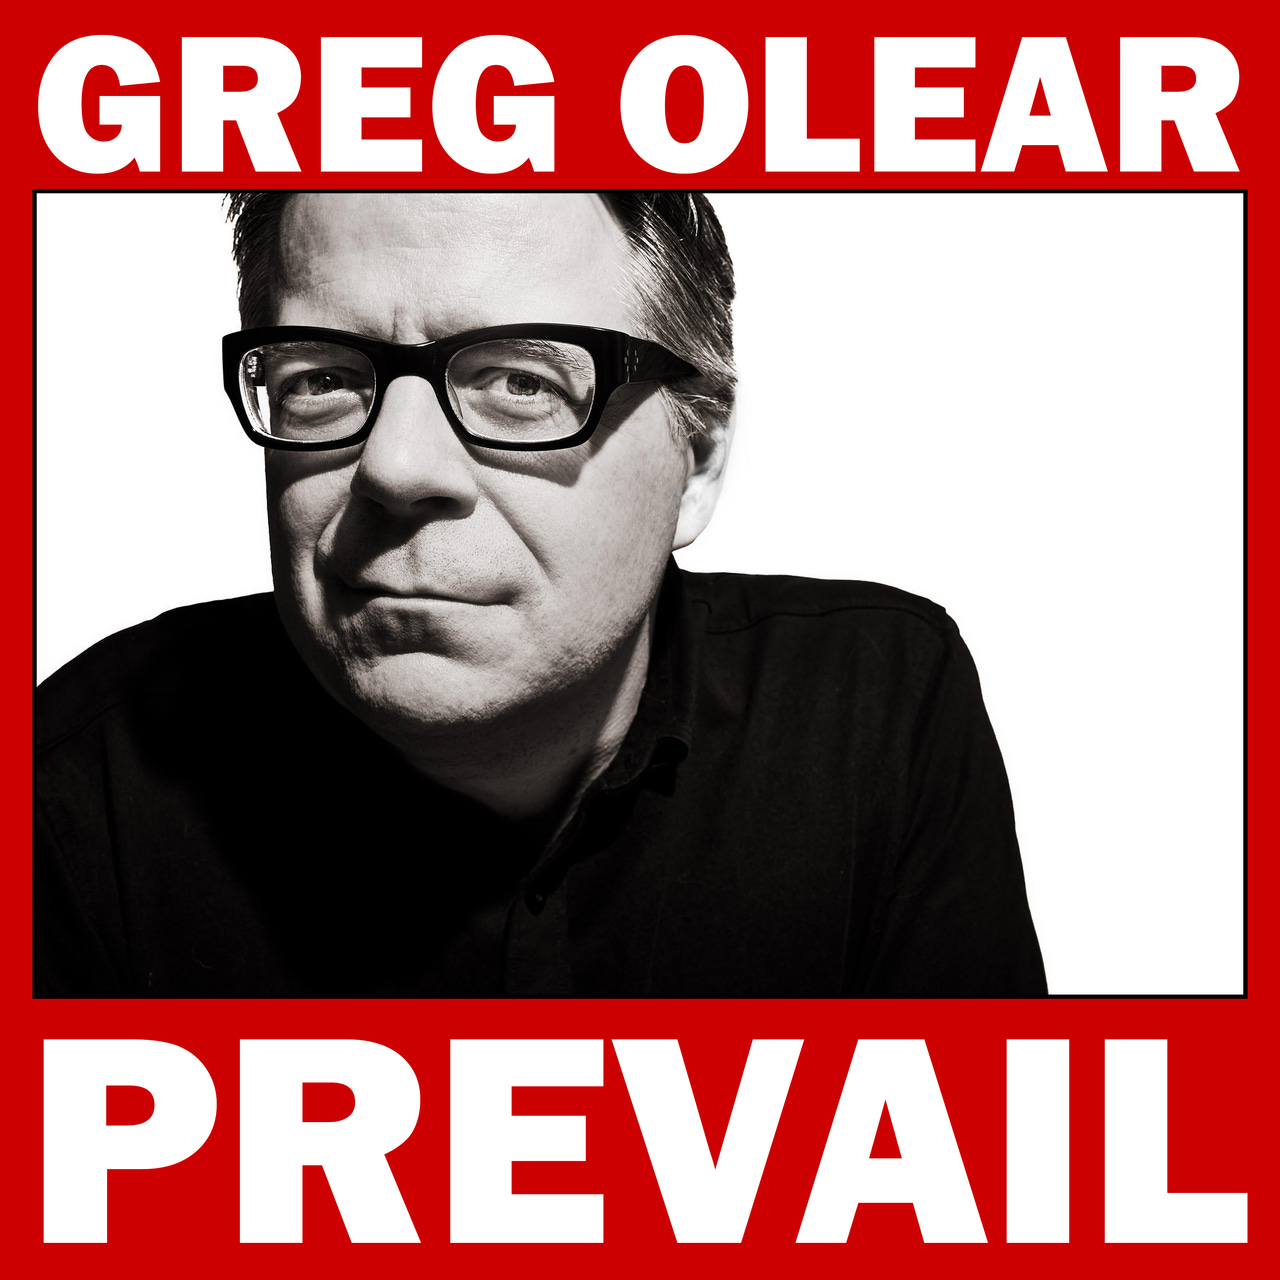 PREVAIL by Greg Olear